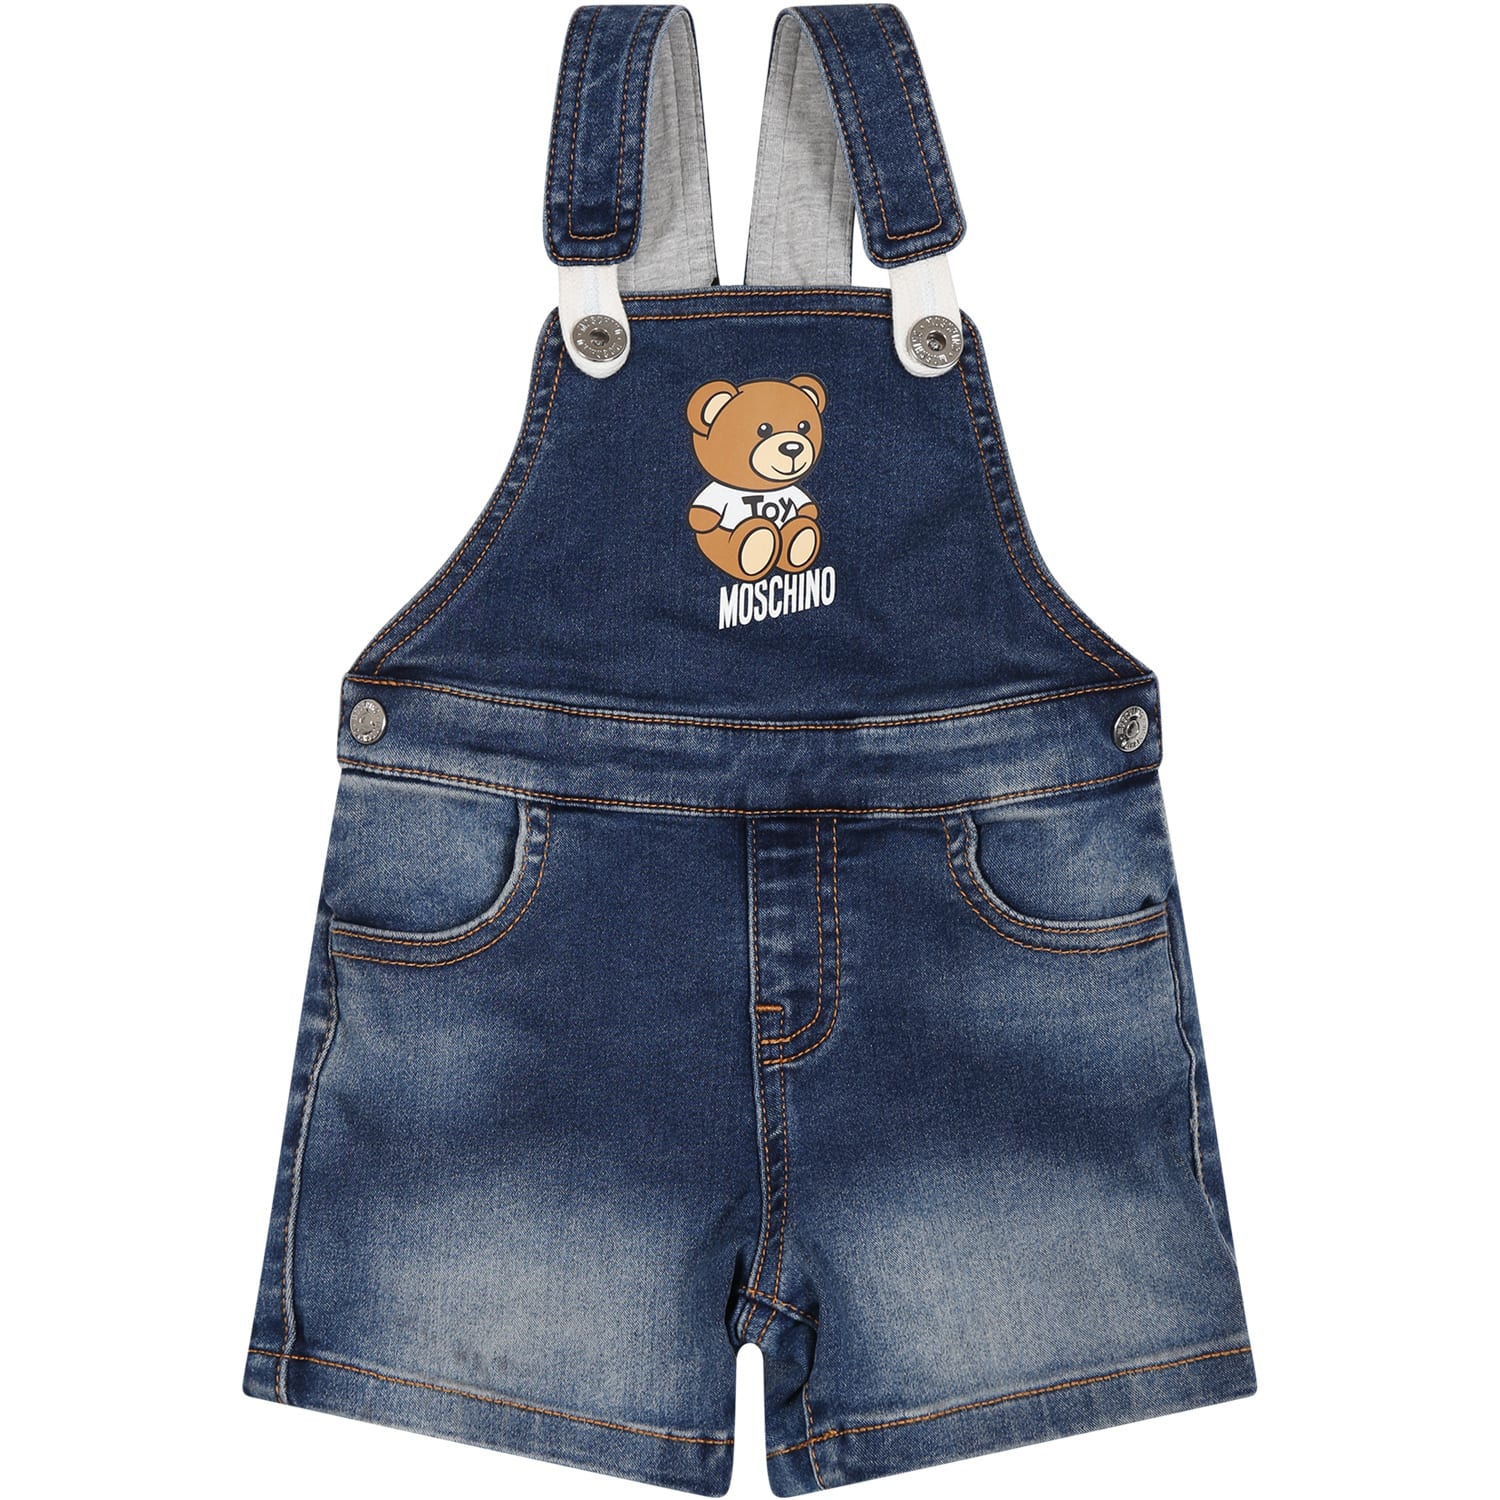 MOSCHINO BLUE DUNGAREES FOR BAY GIRL WITH TEDDY BEAR AND LOGO